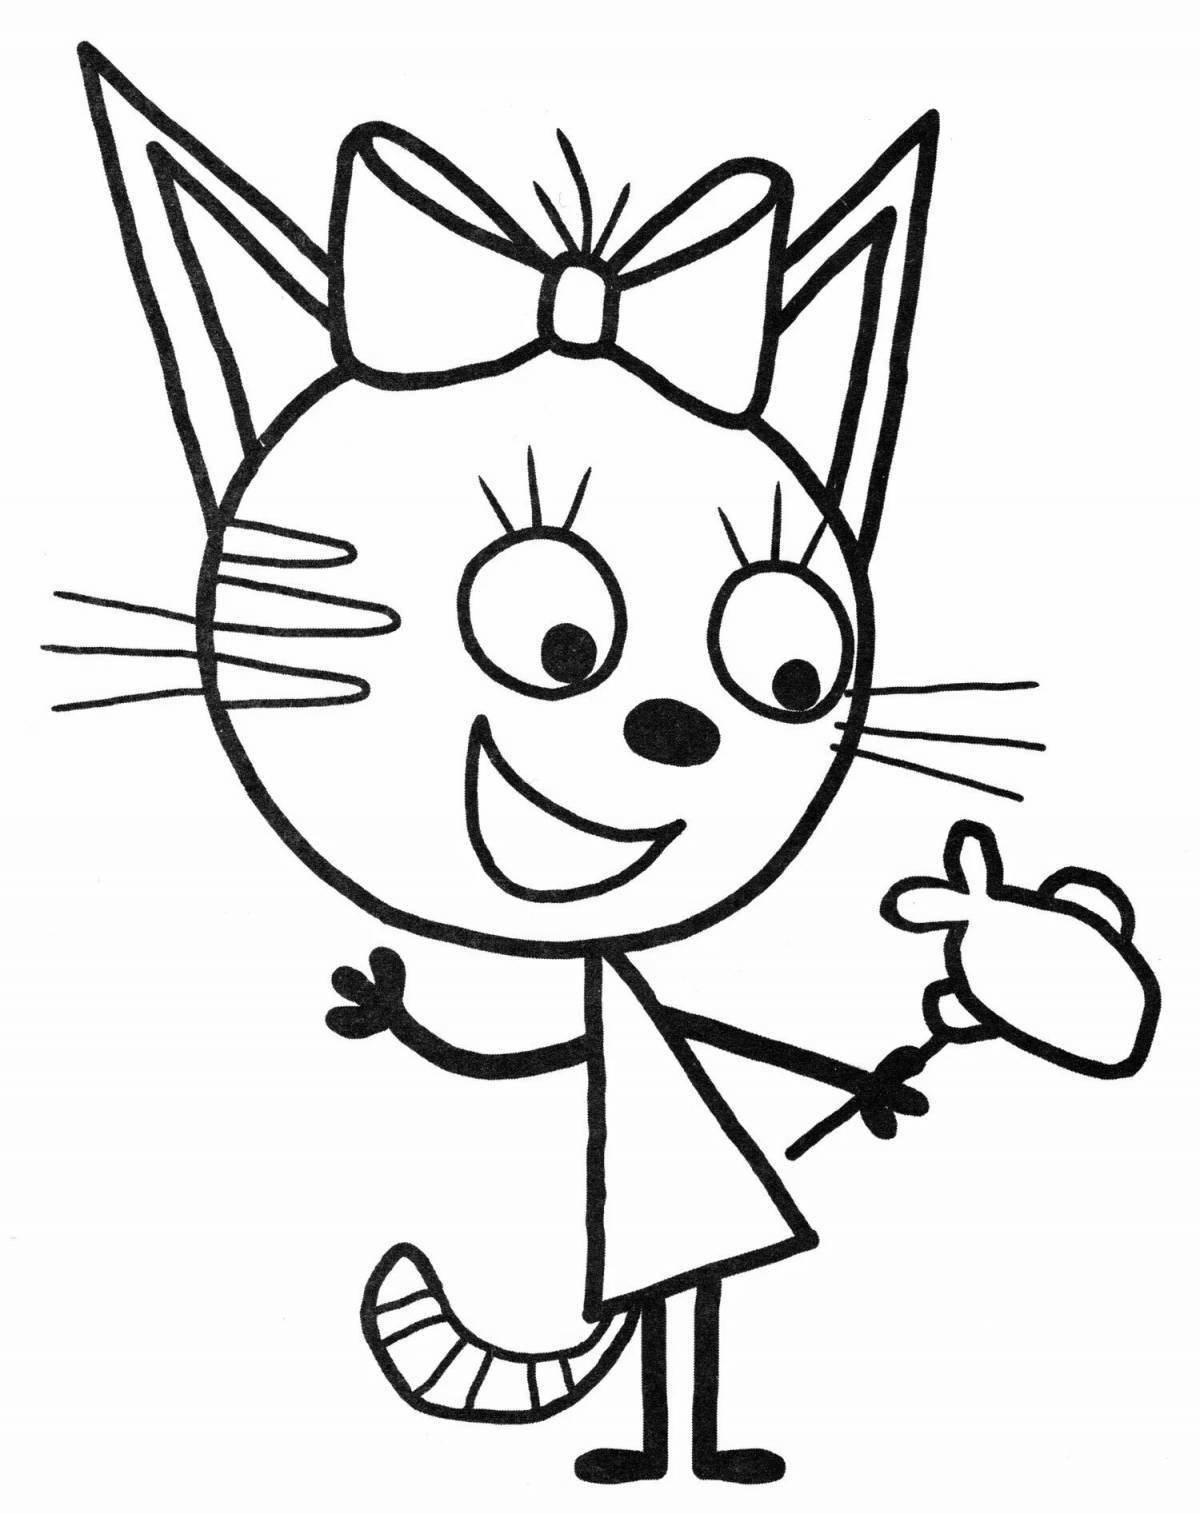 3 caramel cats playful coloring page